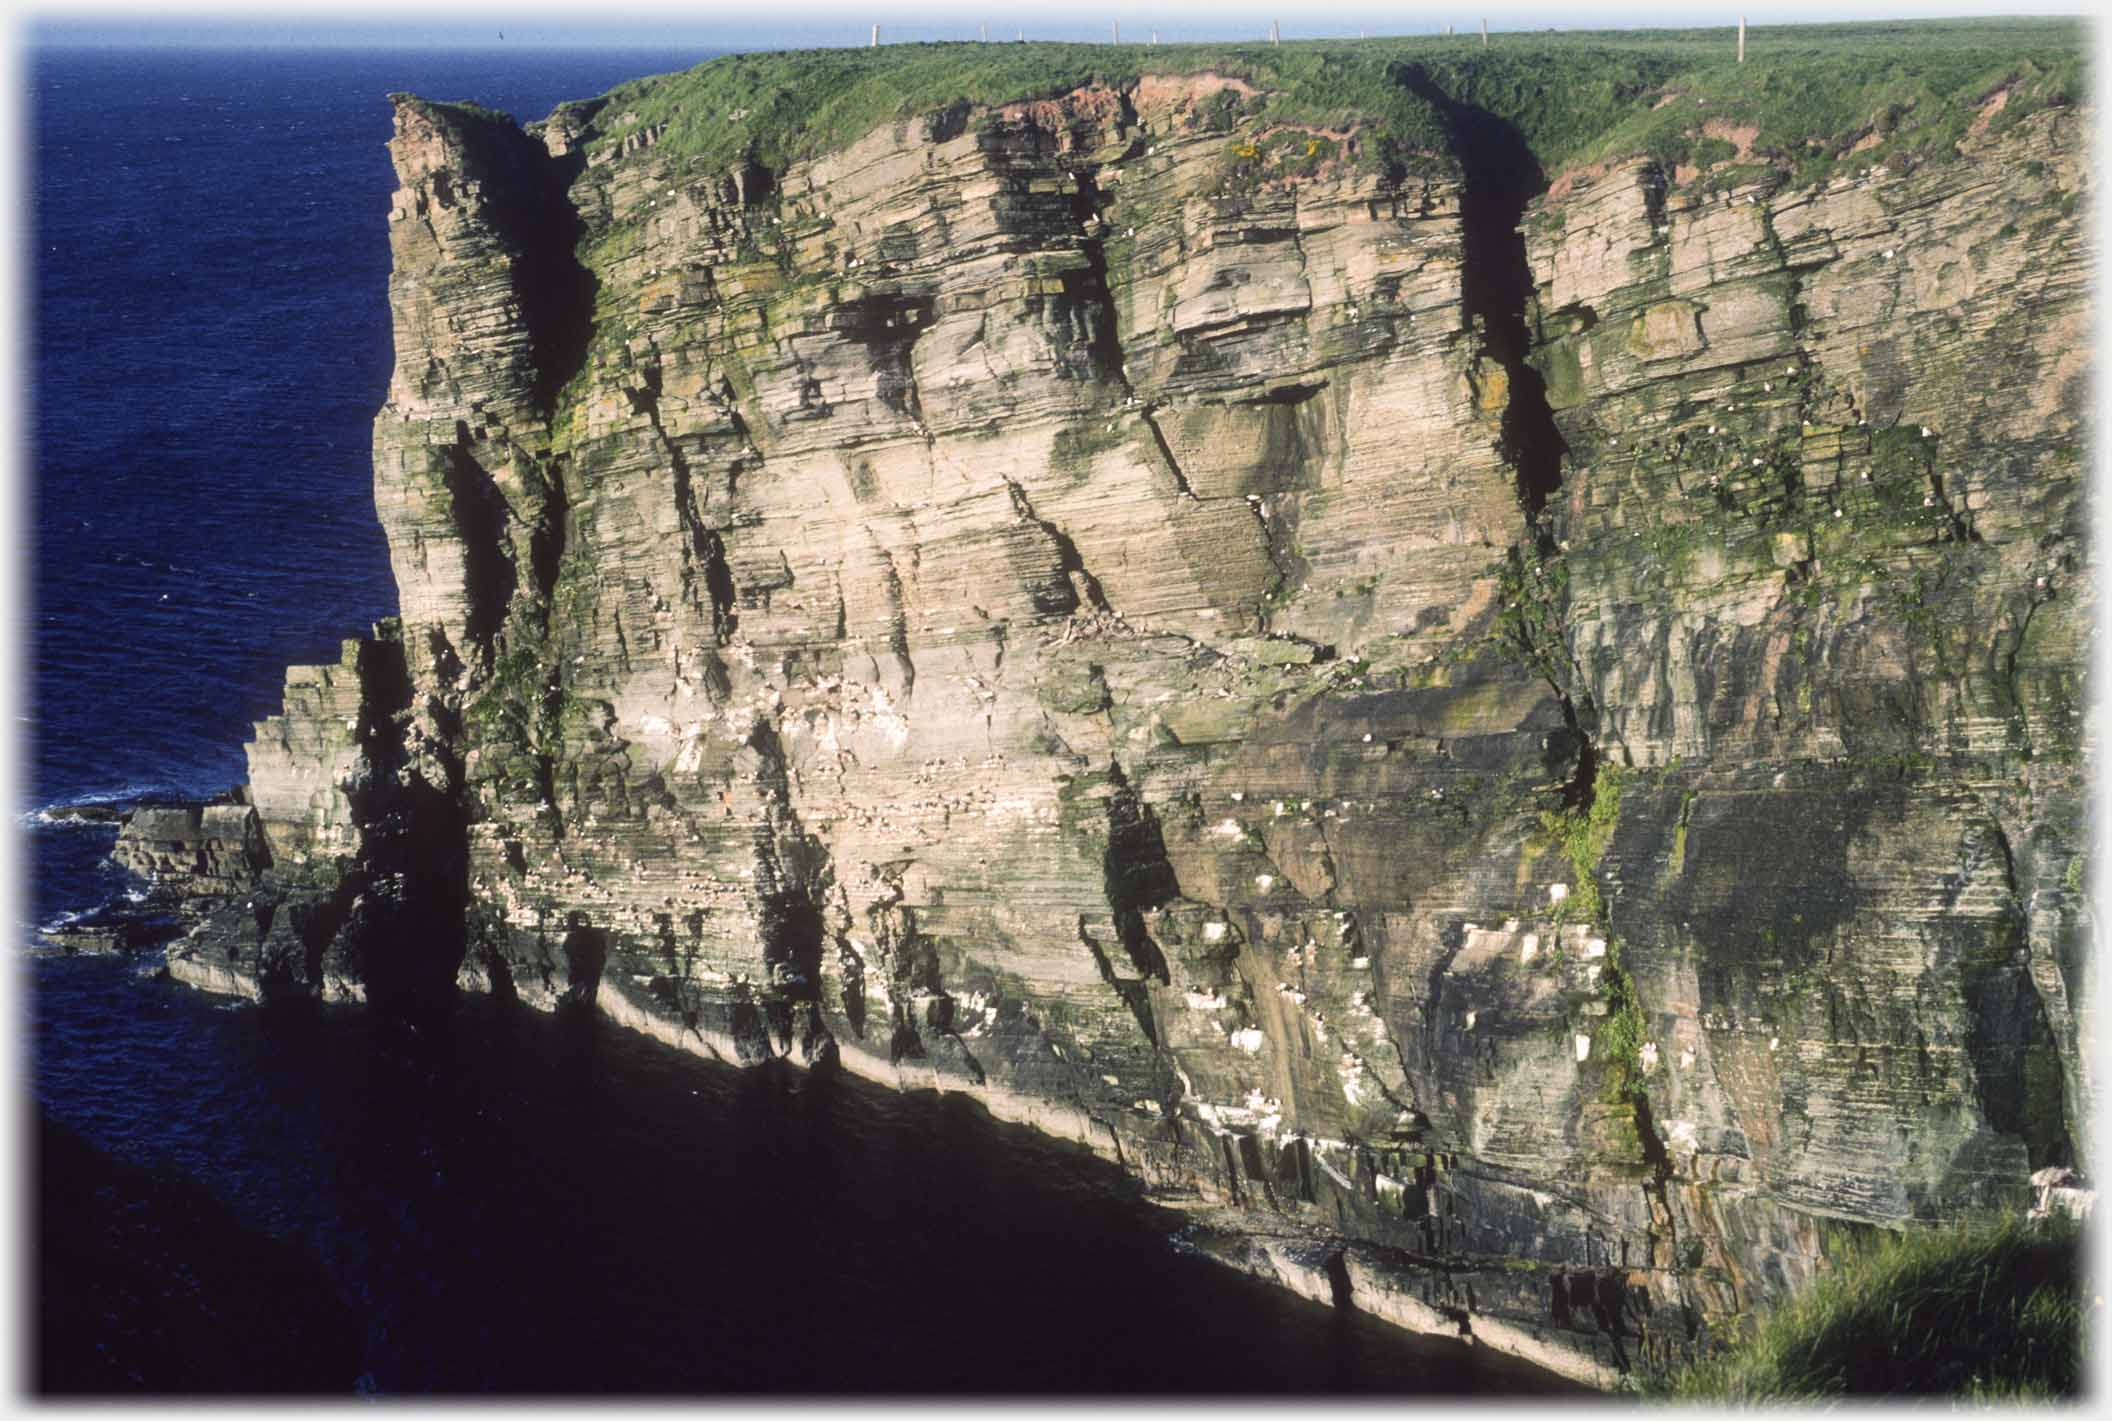 Cliff face with distinct worn layers offering nesting sites.